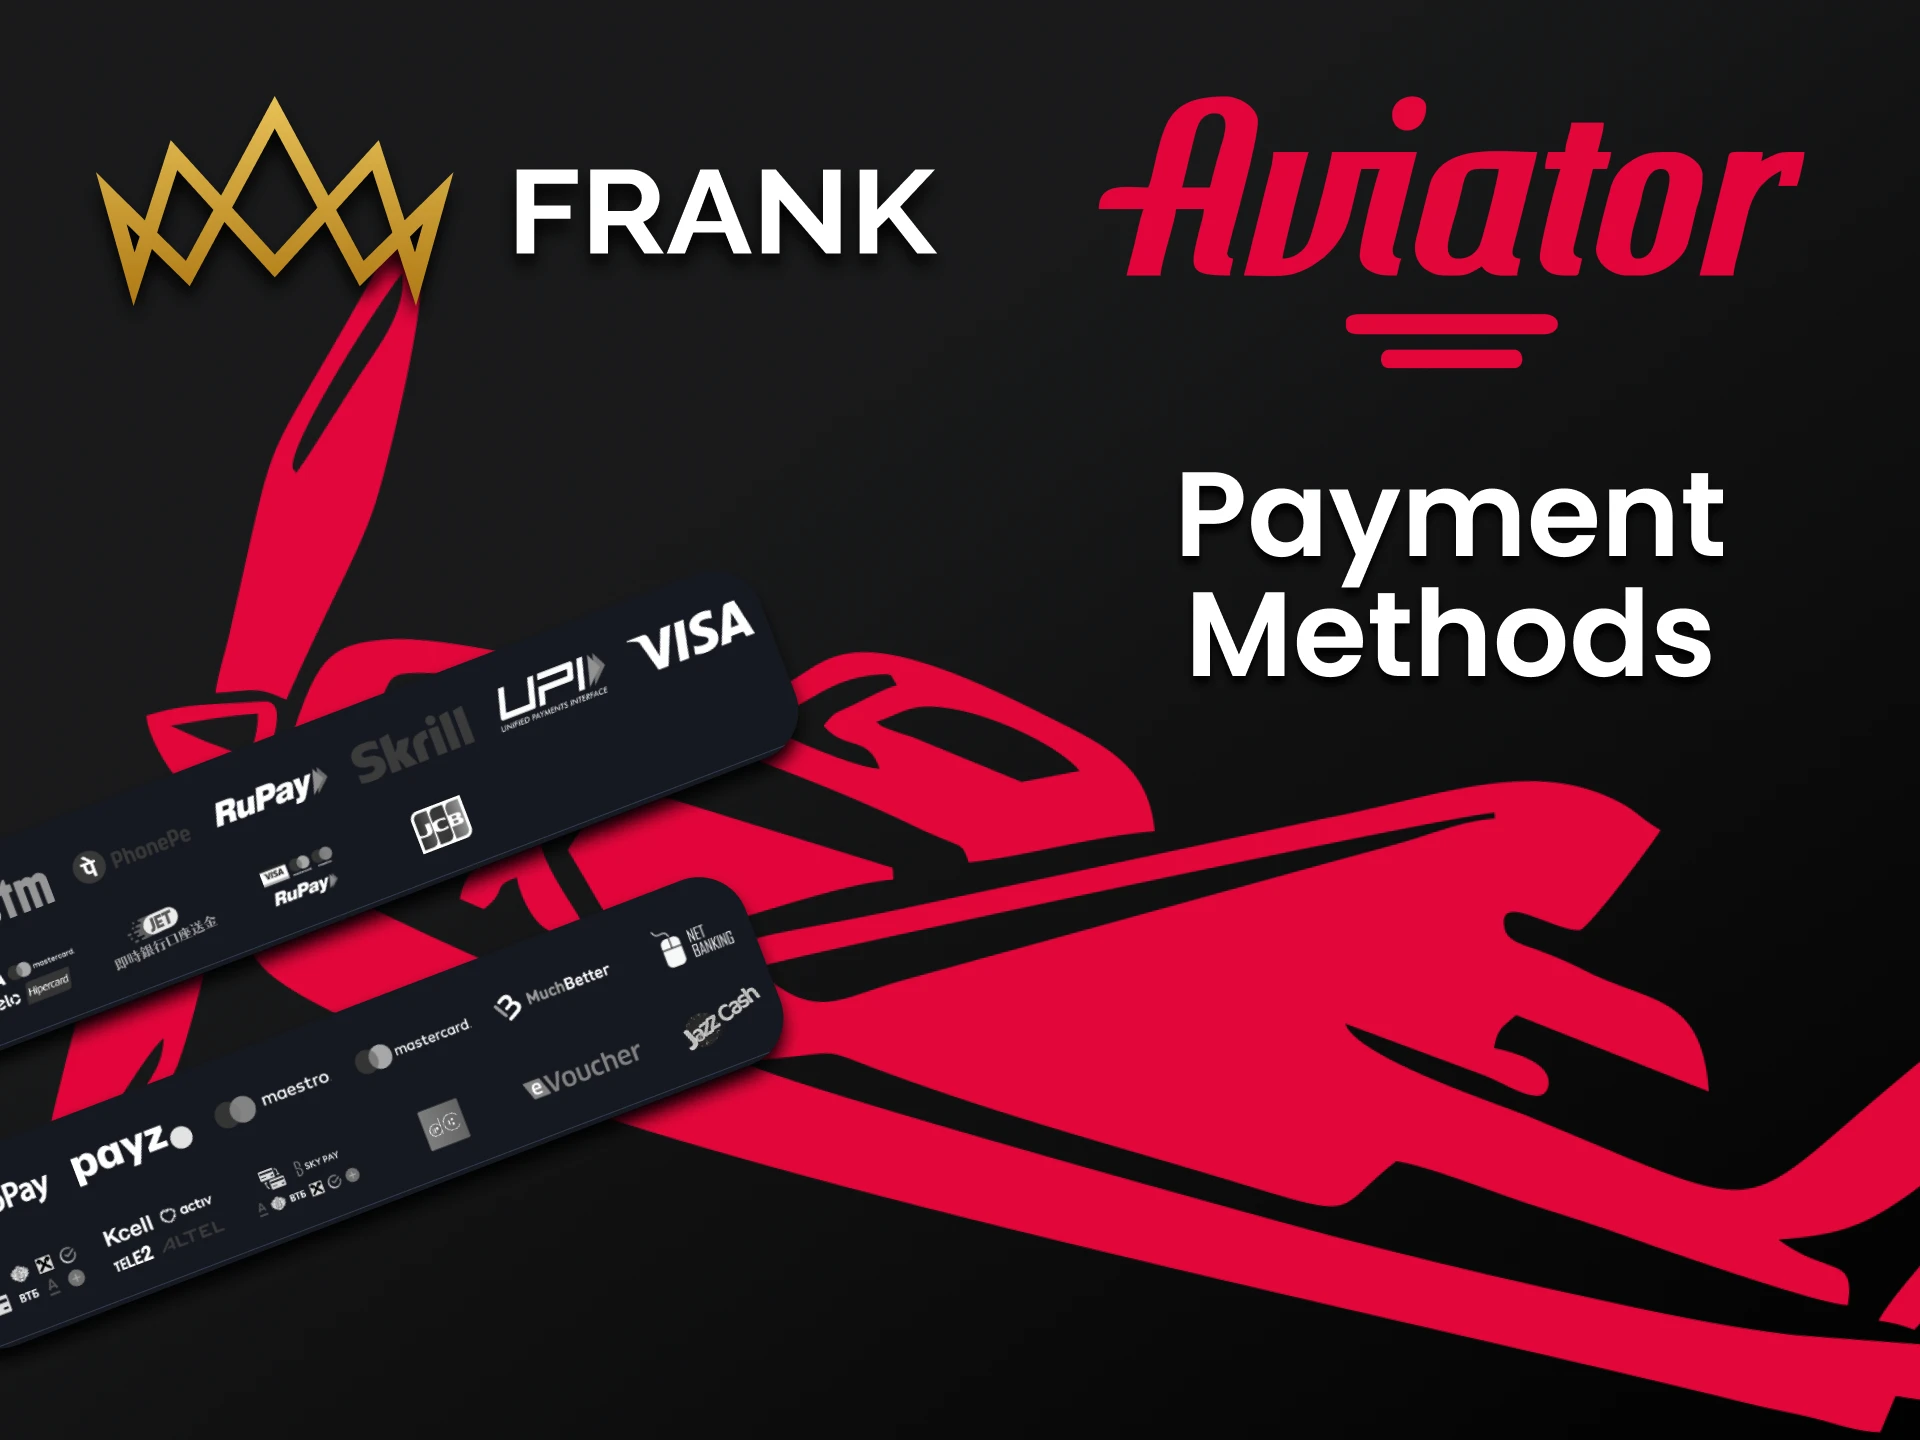 Choose your payment method for Aviator at Frank Casino.